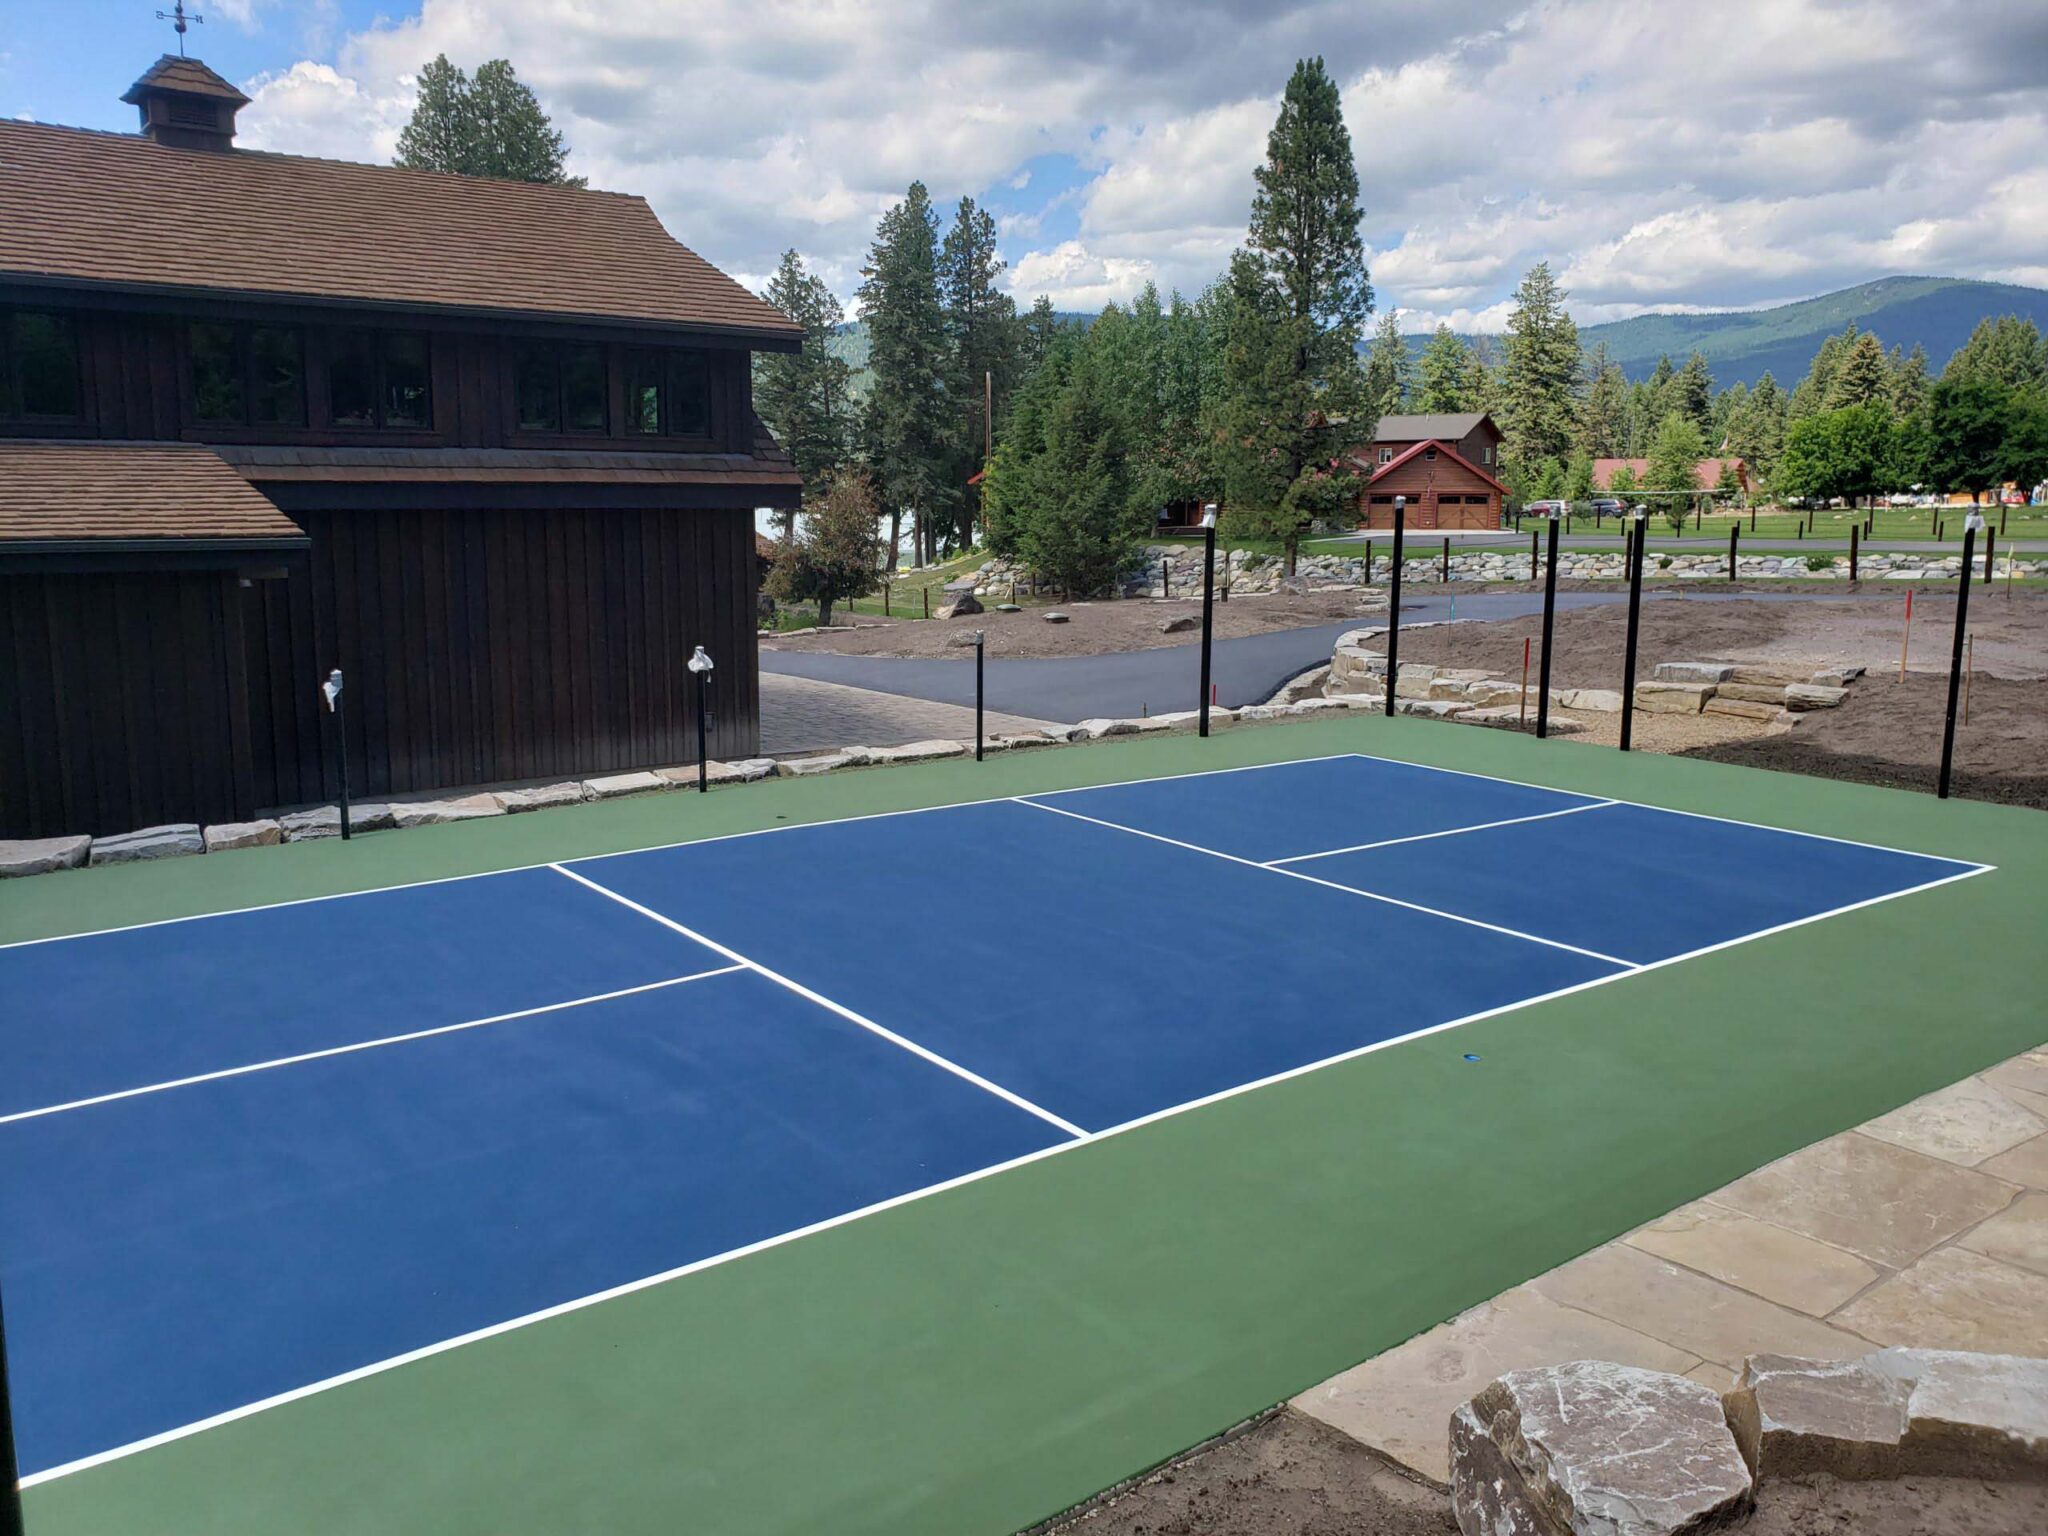 New pickleball court with a mountain backdrop and a green, blue and white color scheme.